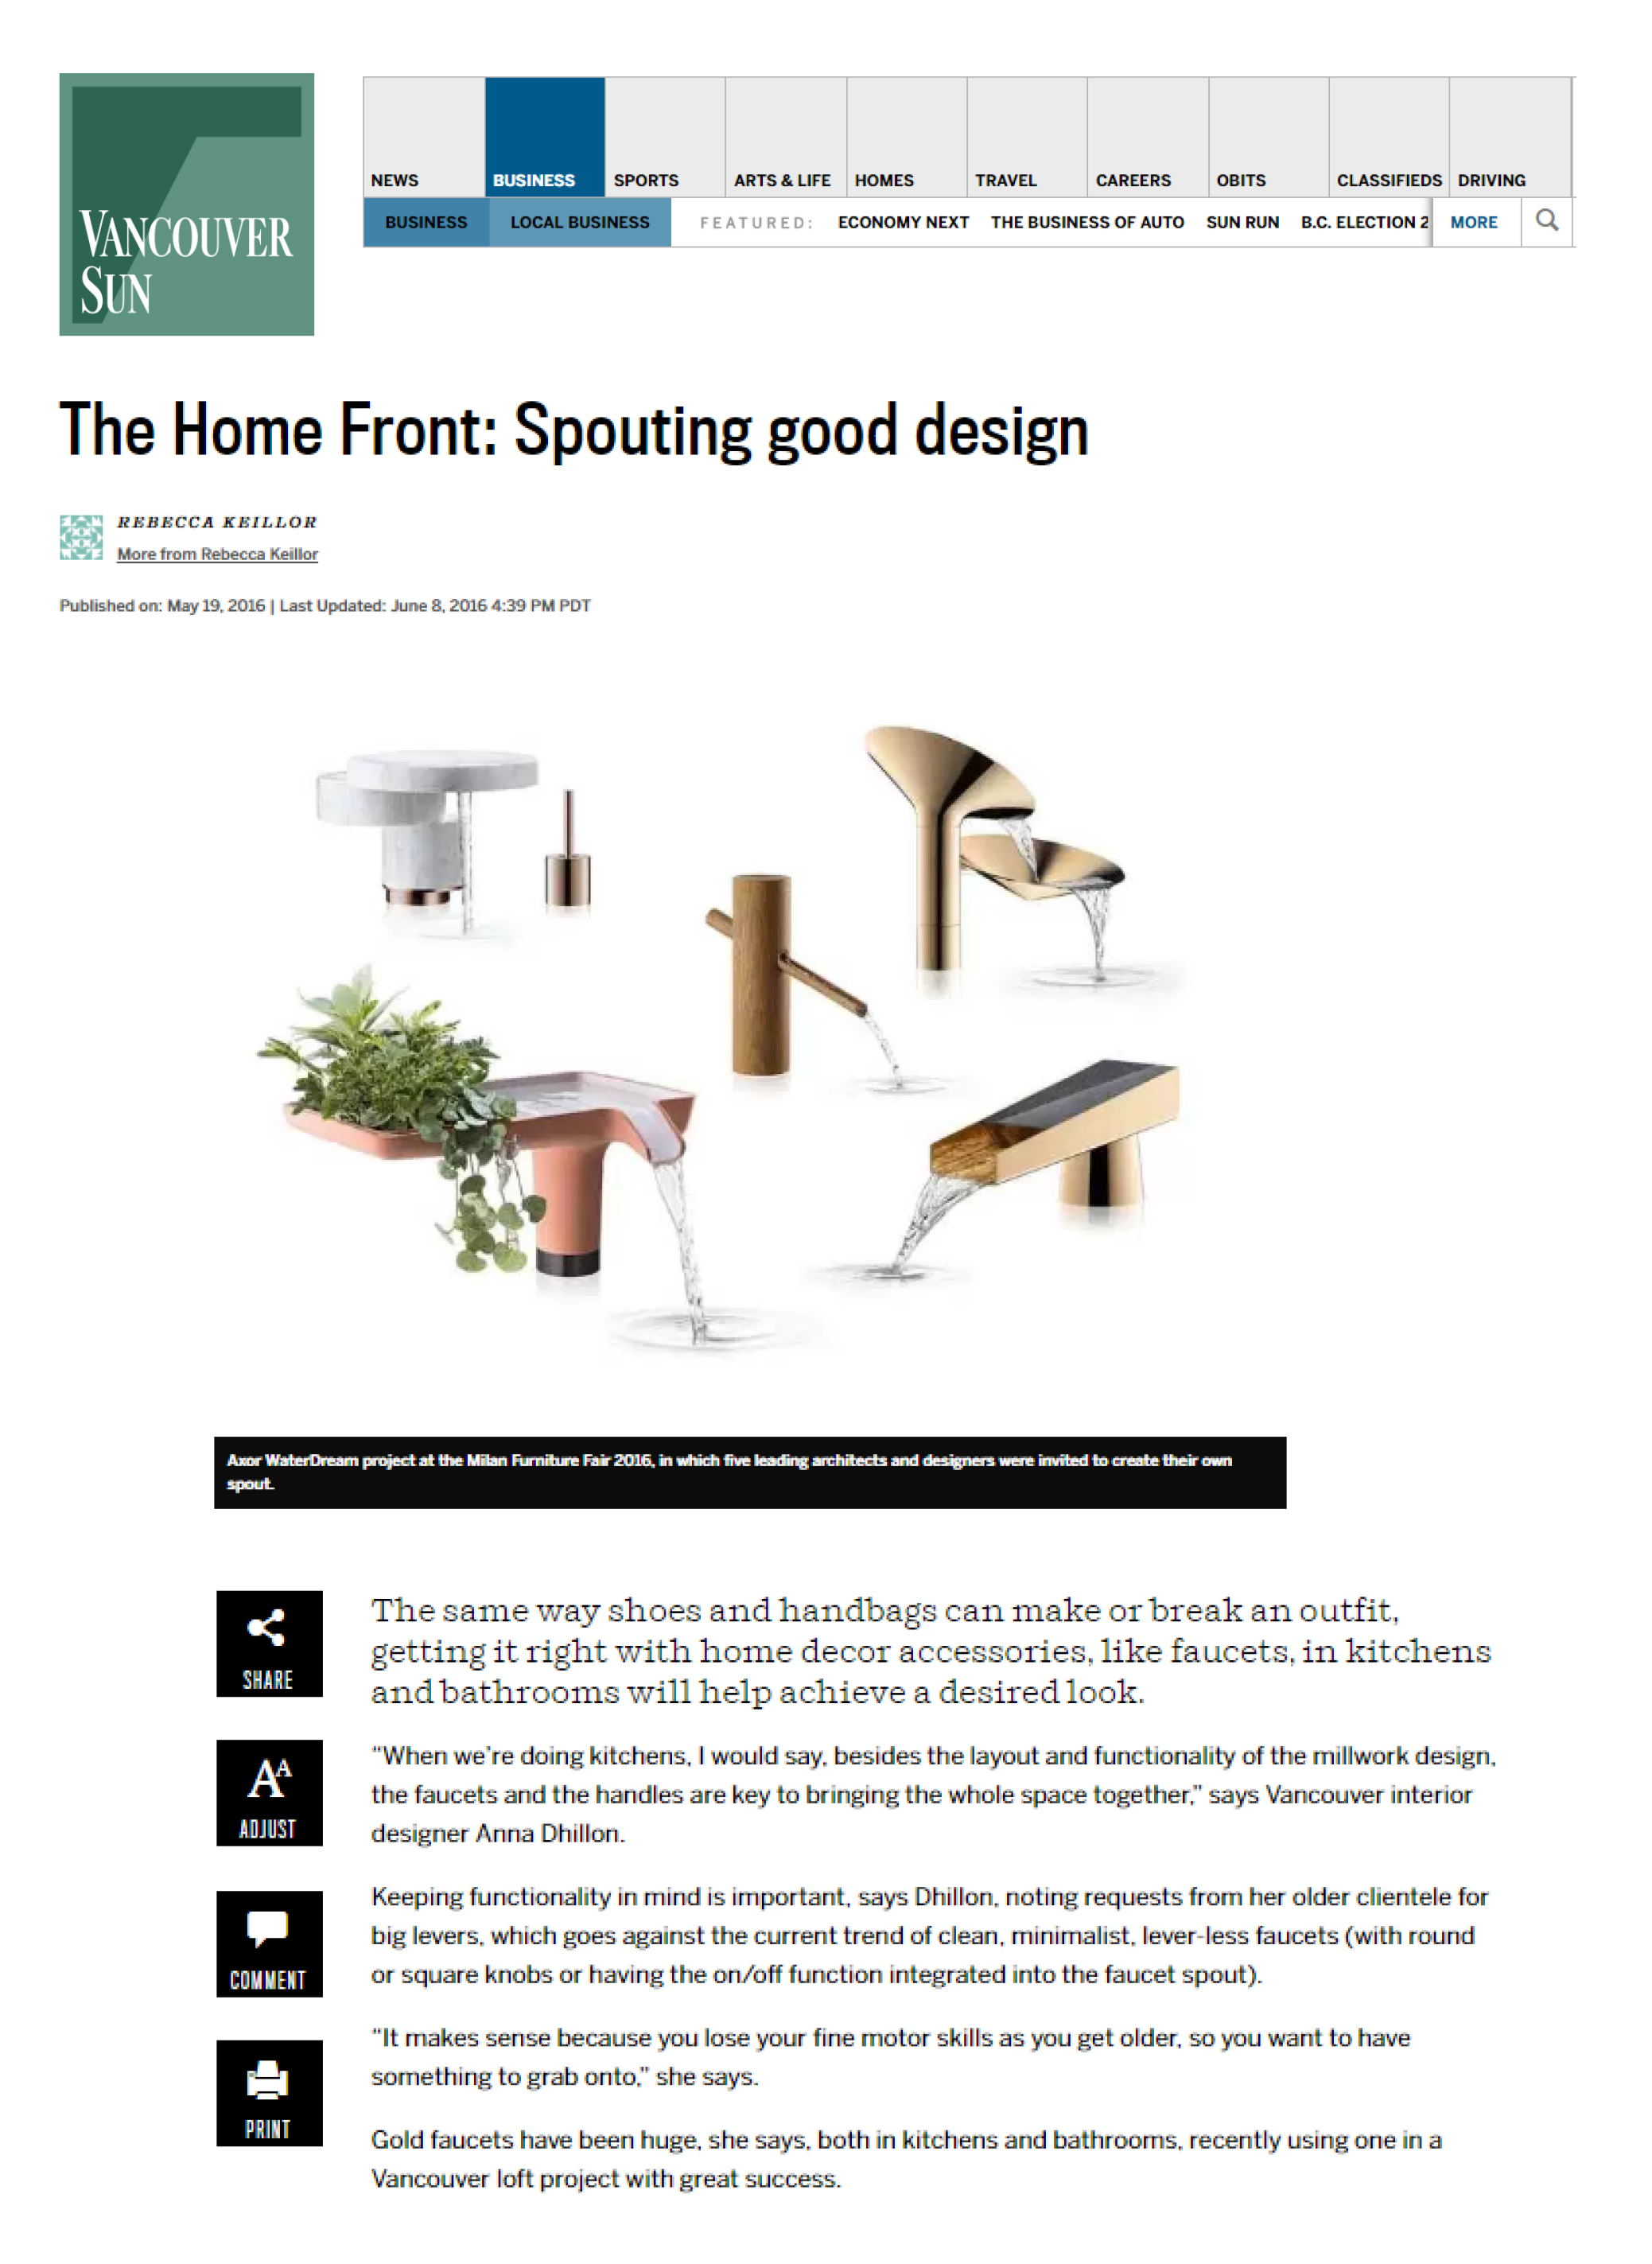 16_05-VS-The_Home_Front-Spouting_Good_Design.jpg